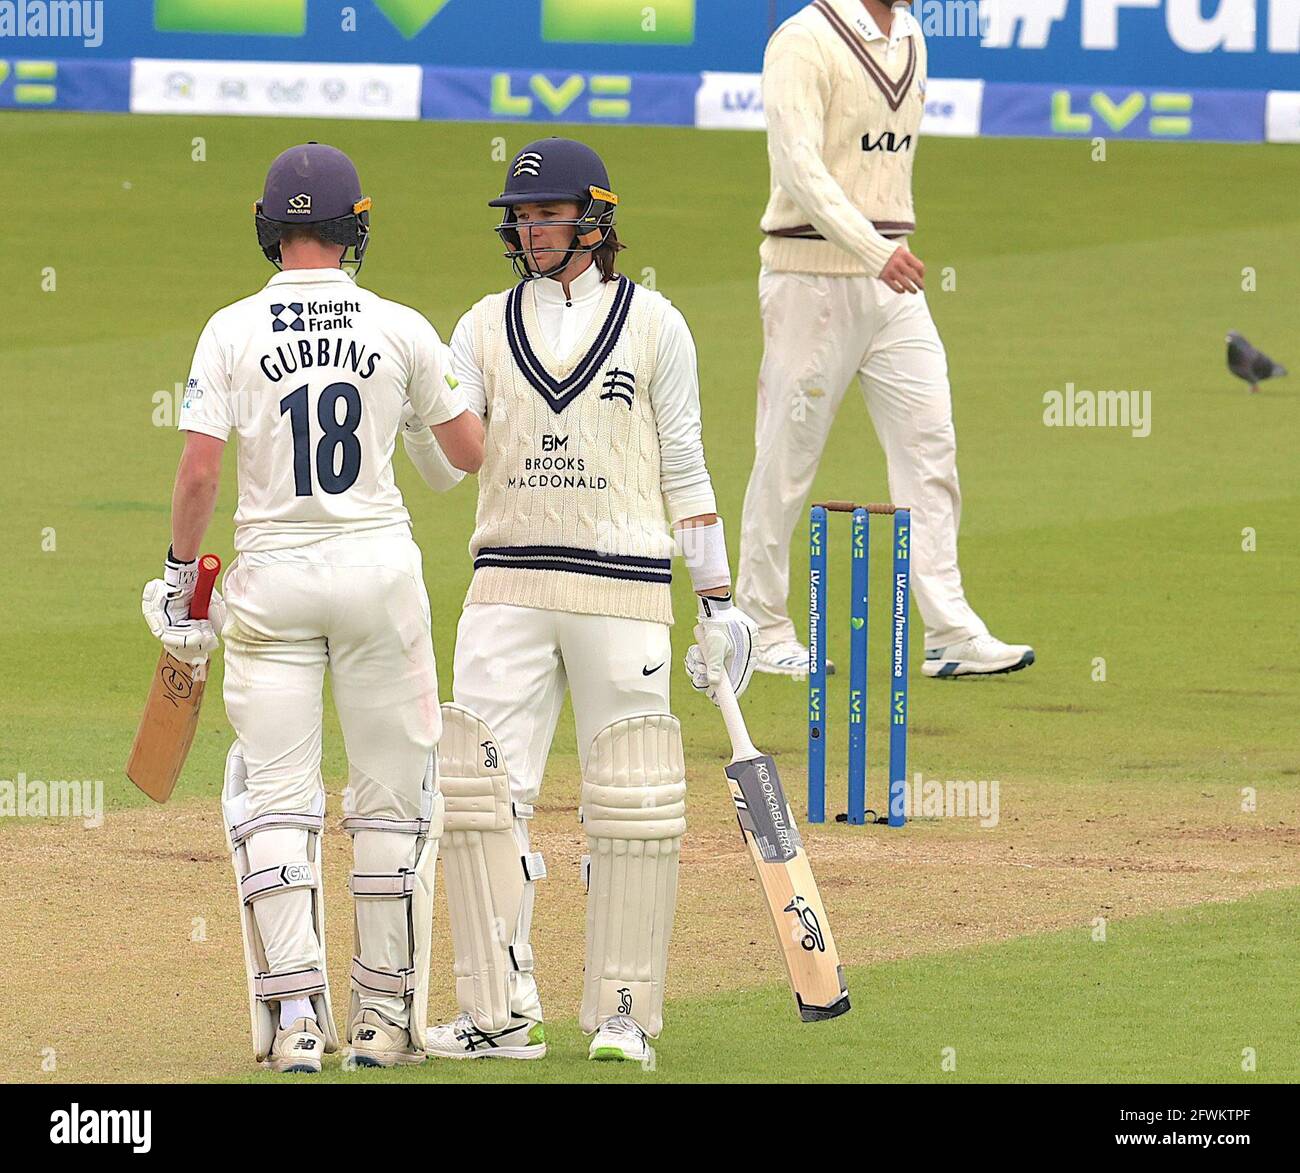 London, UK. 23 May, 2021. London, UK. Middlesex’s Peter Handscomb gets his fifty as Surrey take on Middlesex in  the County Championship at the Kia Oval, day four. David Rowe/Alamy Live News Stock Photo